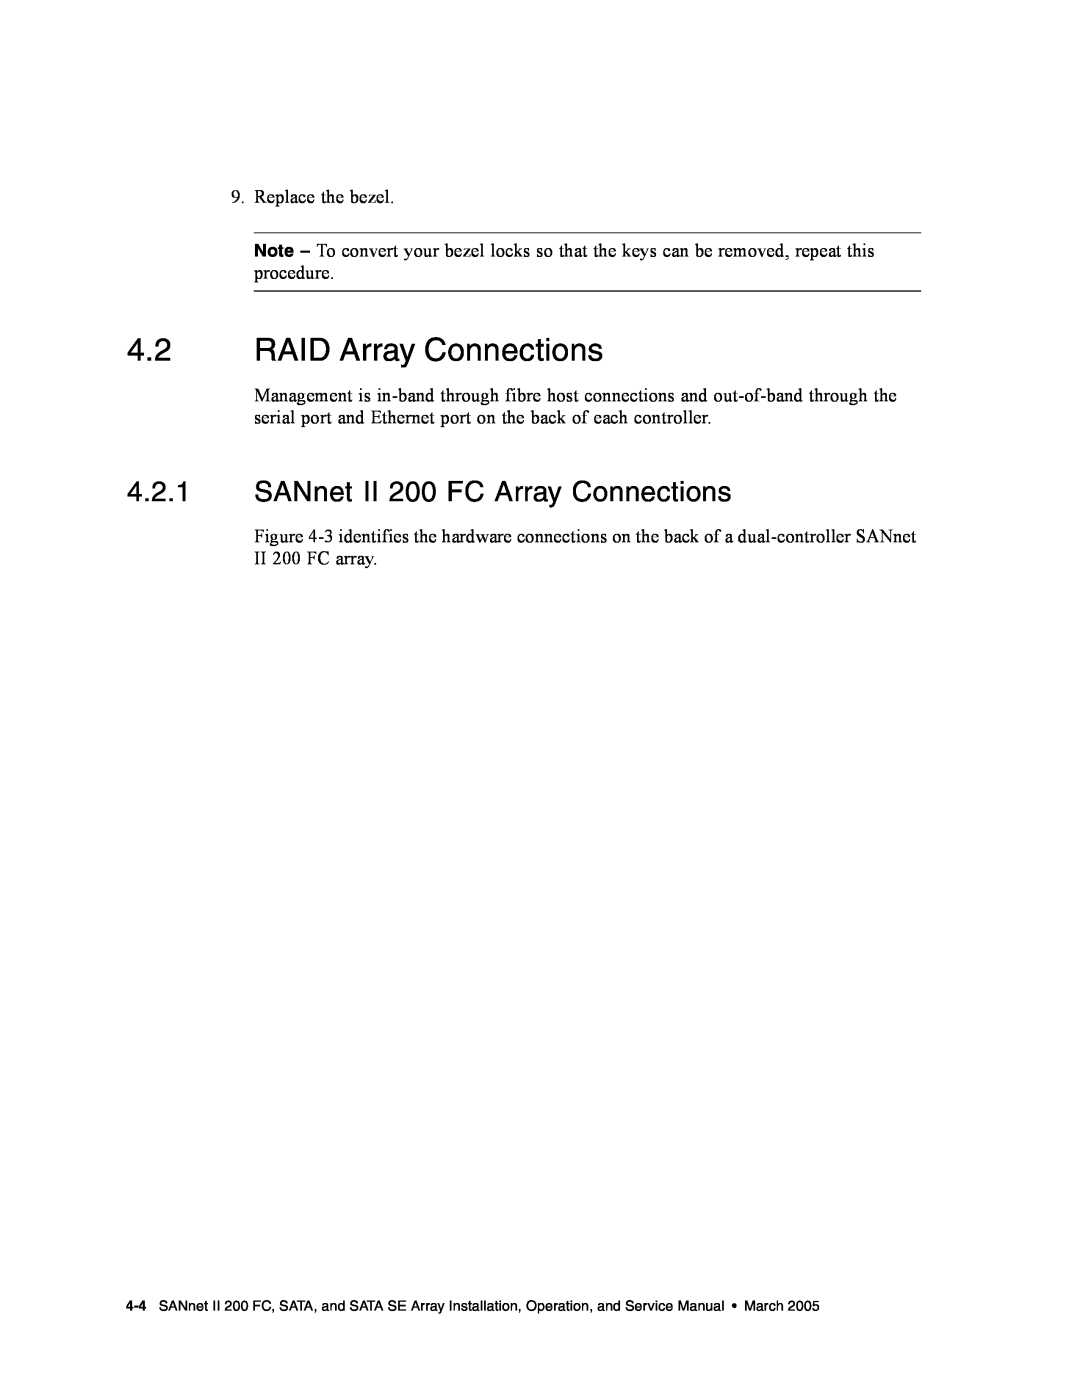 Dot Hill Systems service manual RAID Array Connections, SANnet II 200 FC Array Connections 